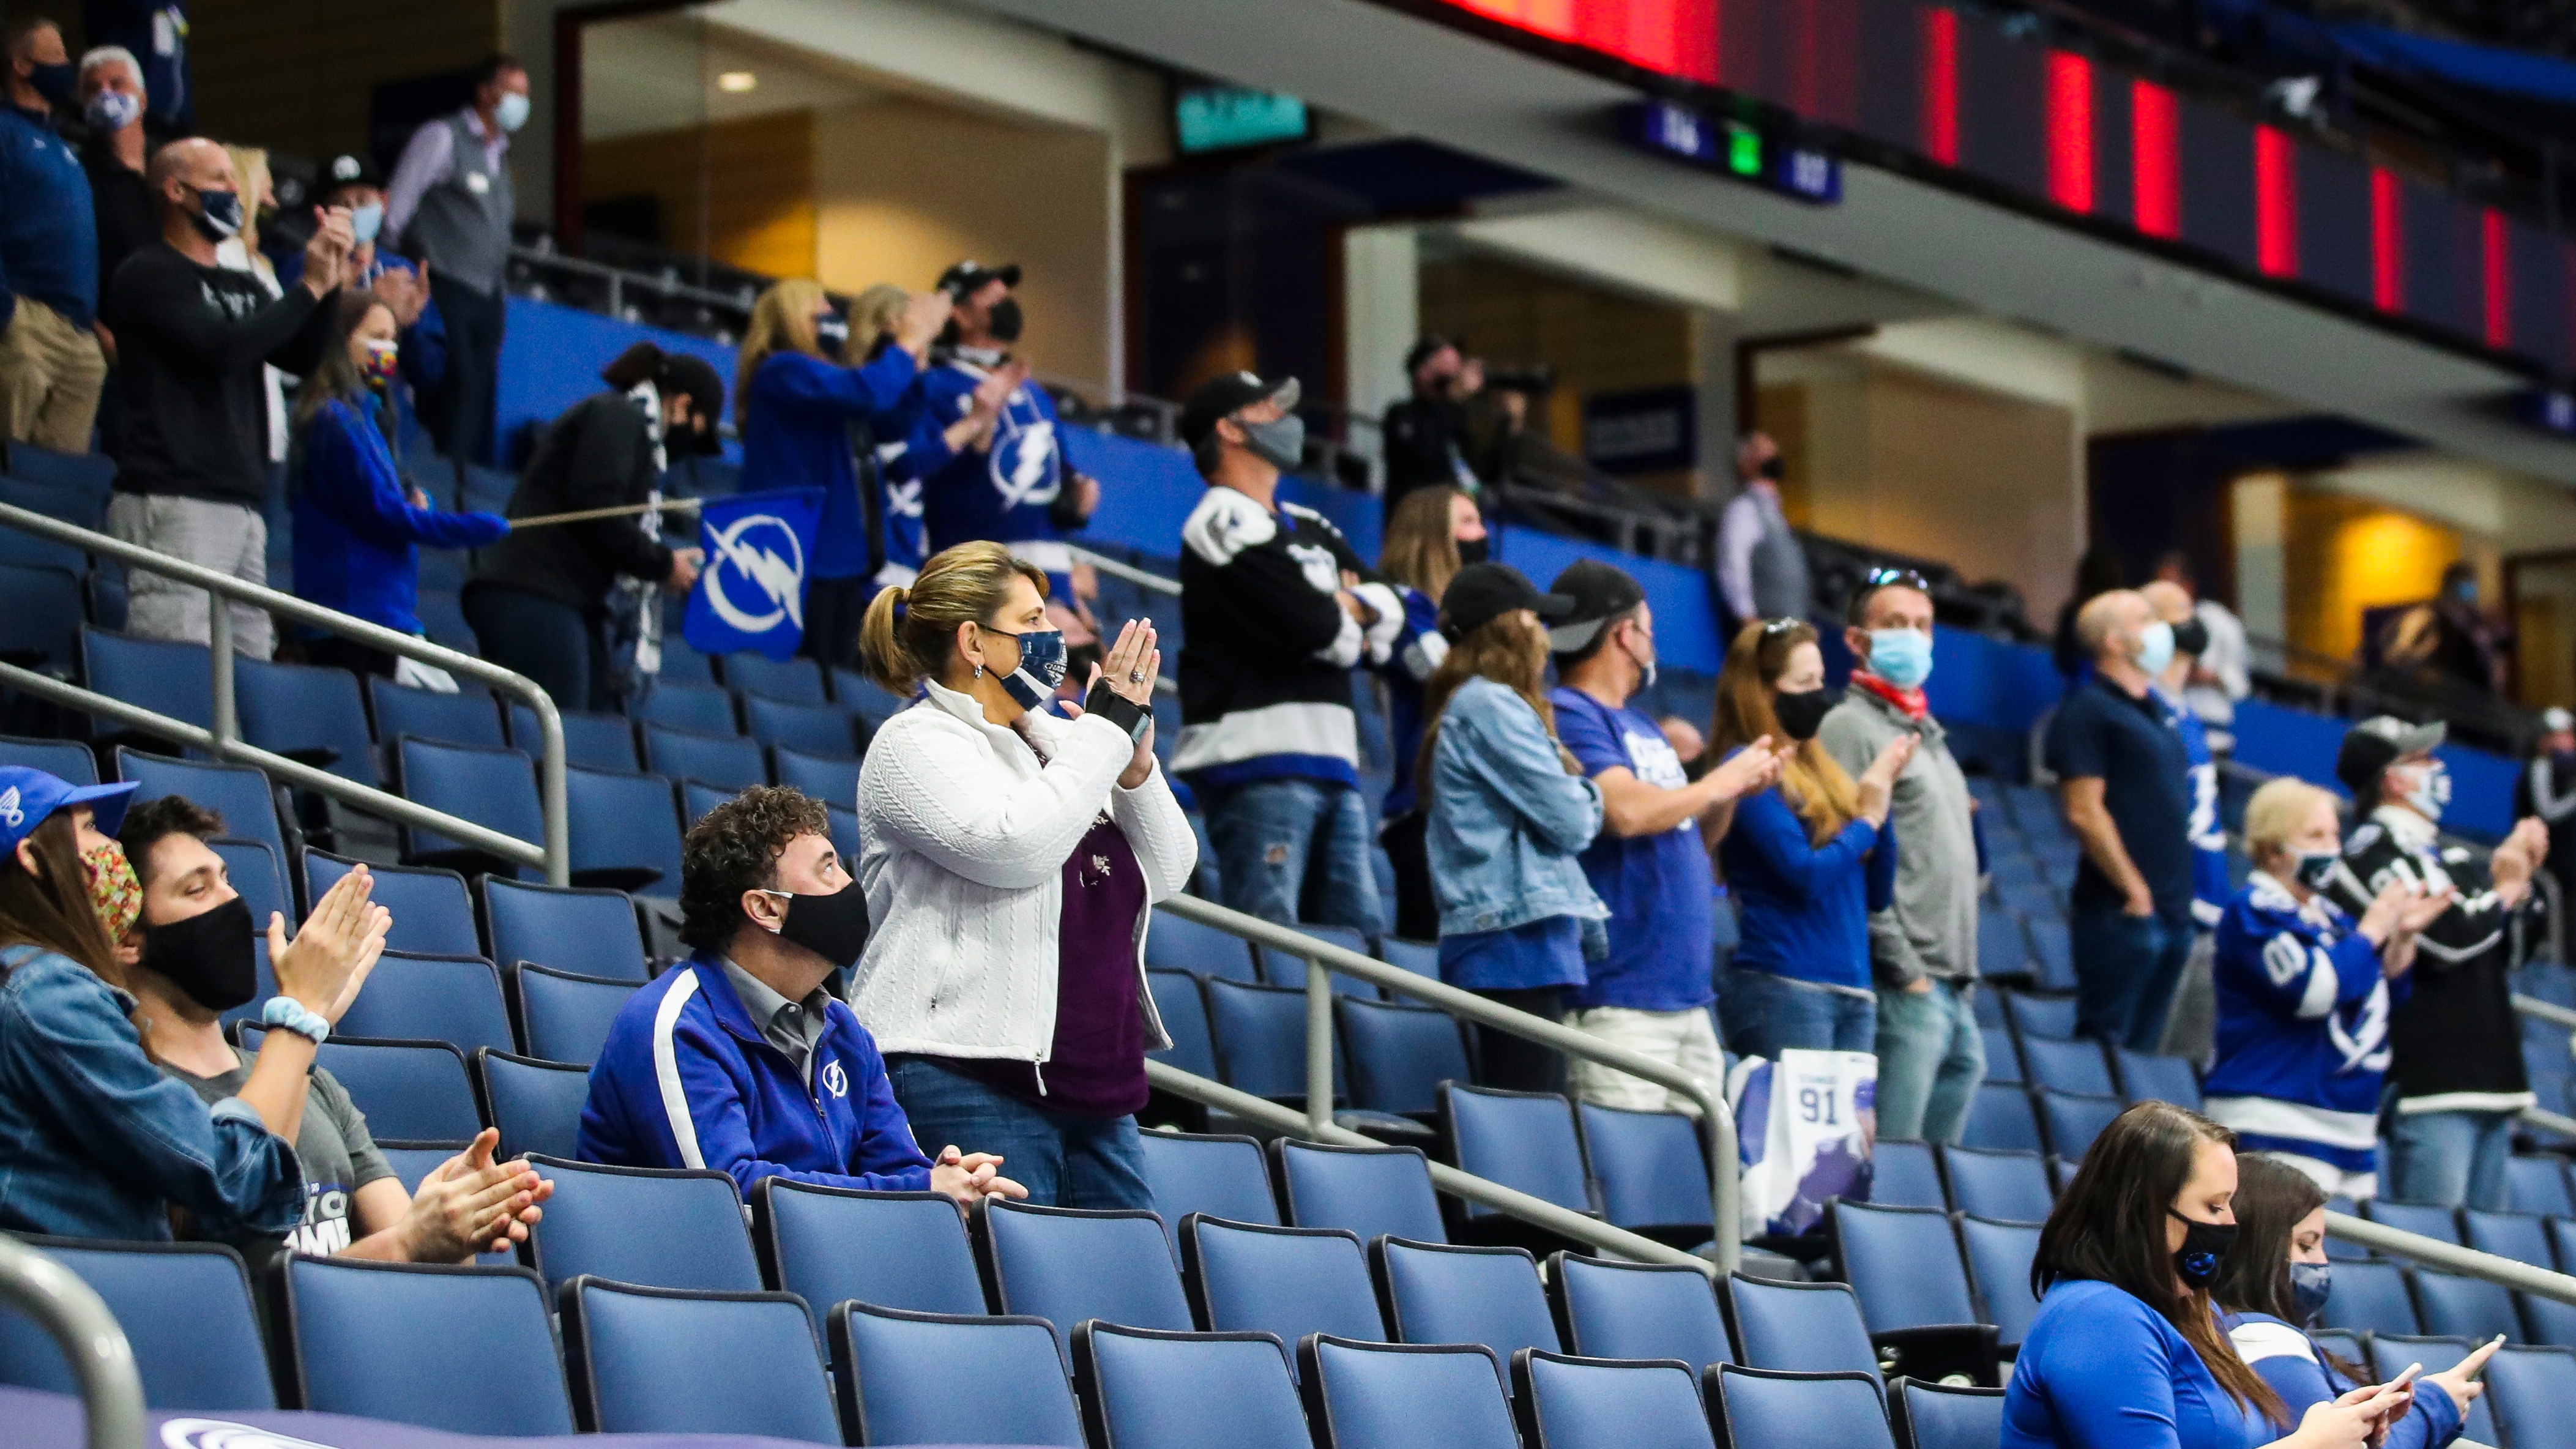 Opening Amalie Arena to more fans for Lightning postseason a